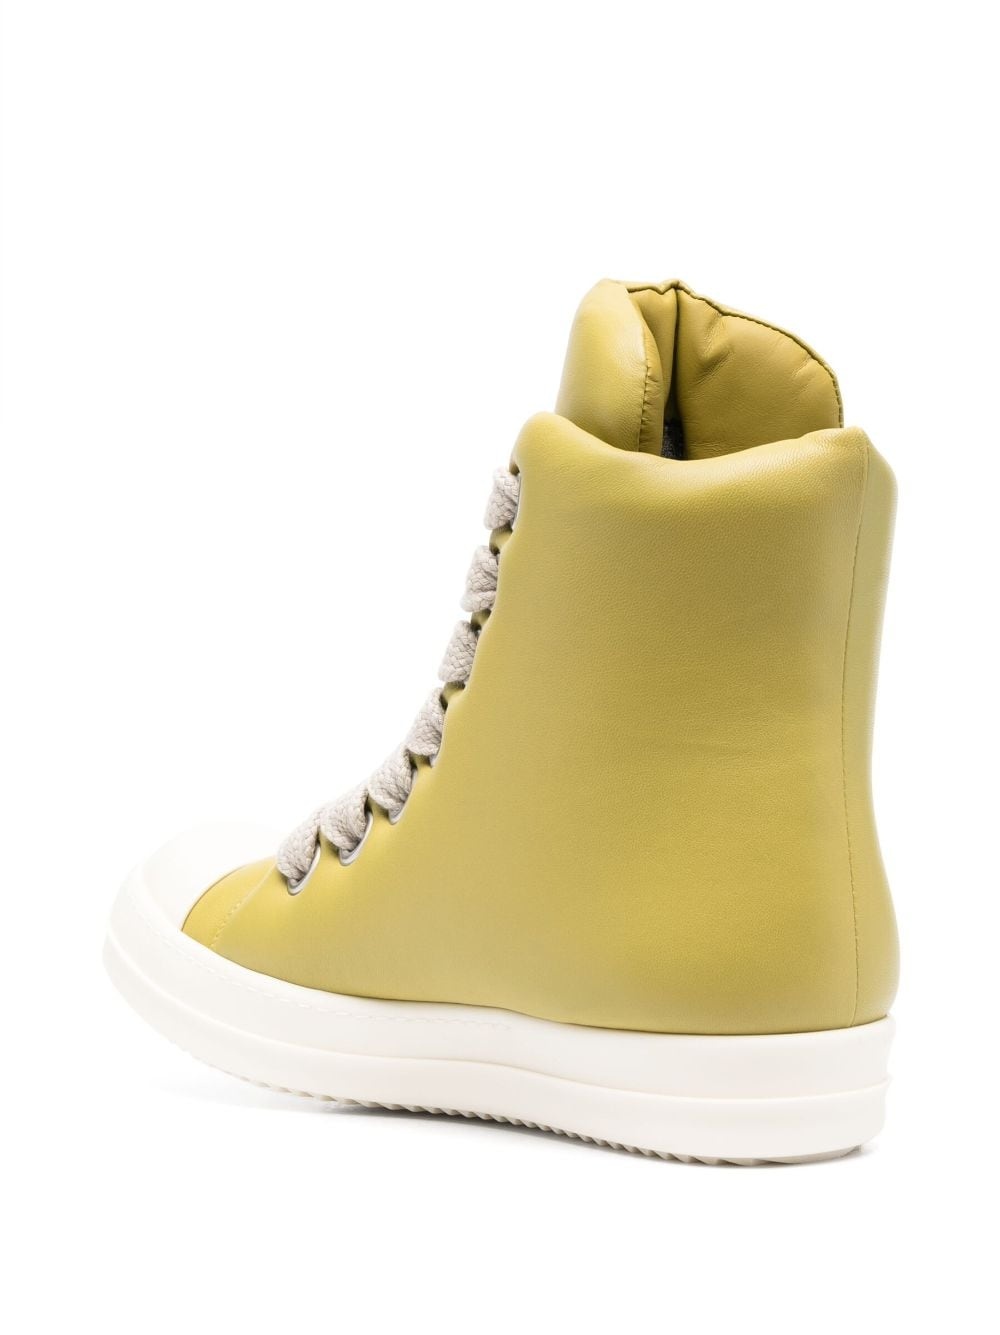 high-top padded leather sneakers - 3